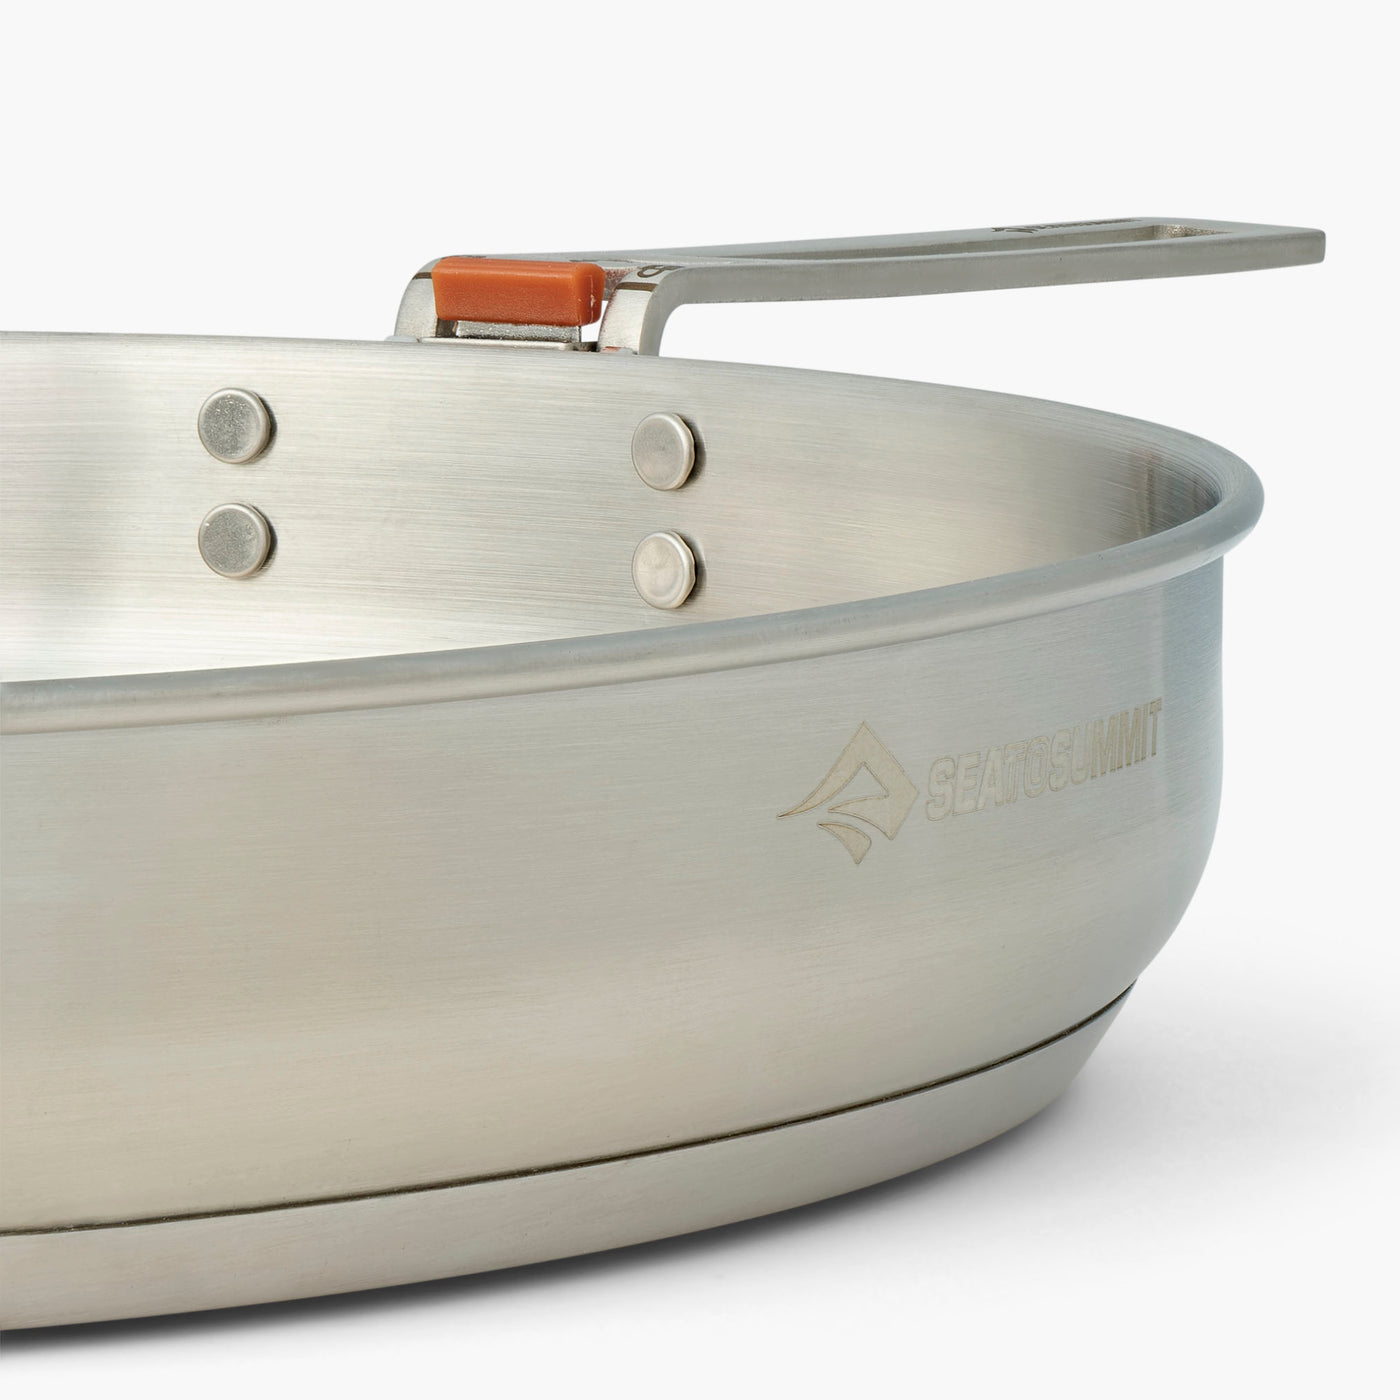 Detour Stainless Steel Pan - 10in